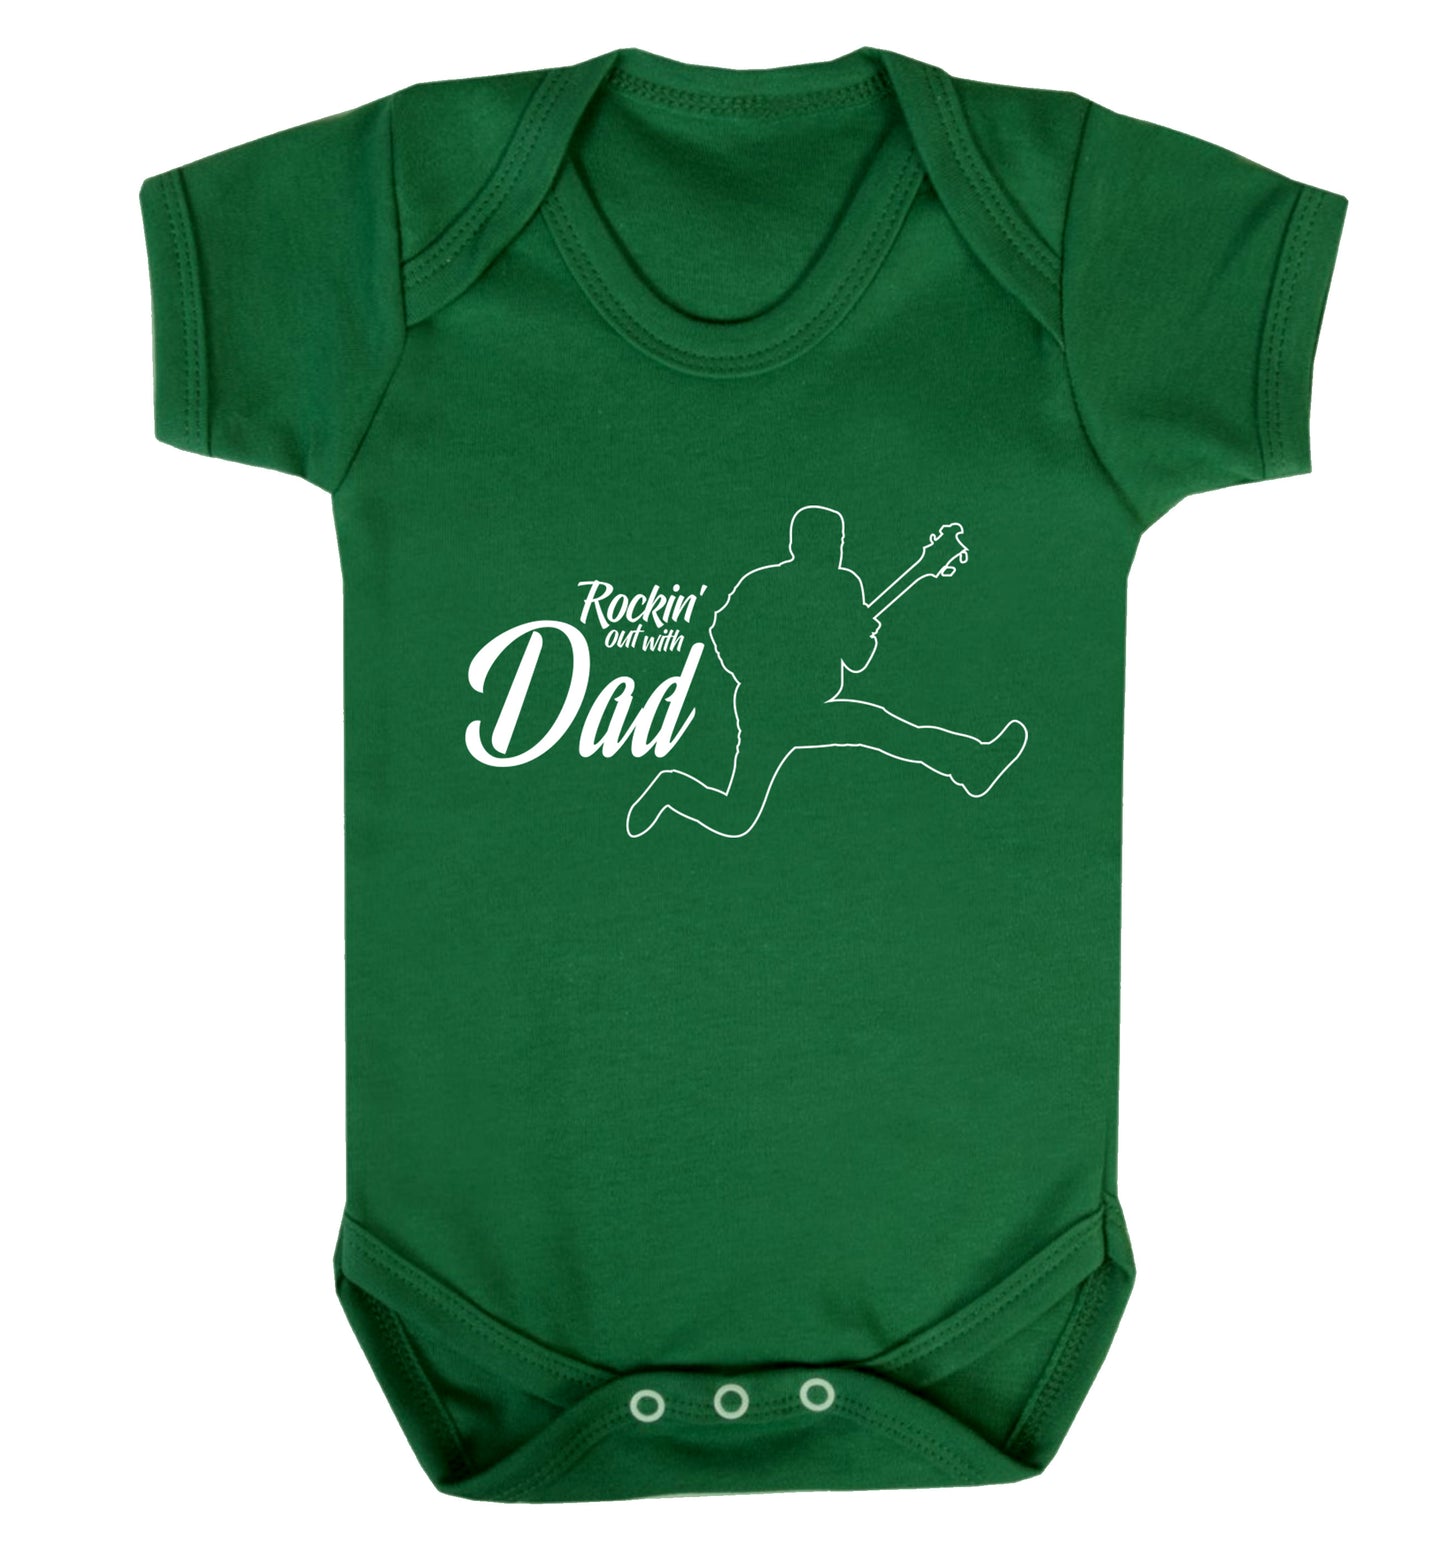 Rockin out with dad Baby Vest green 18-24 months